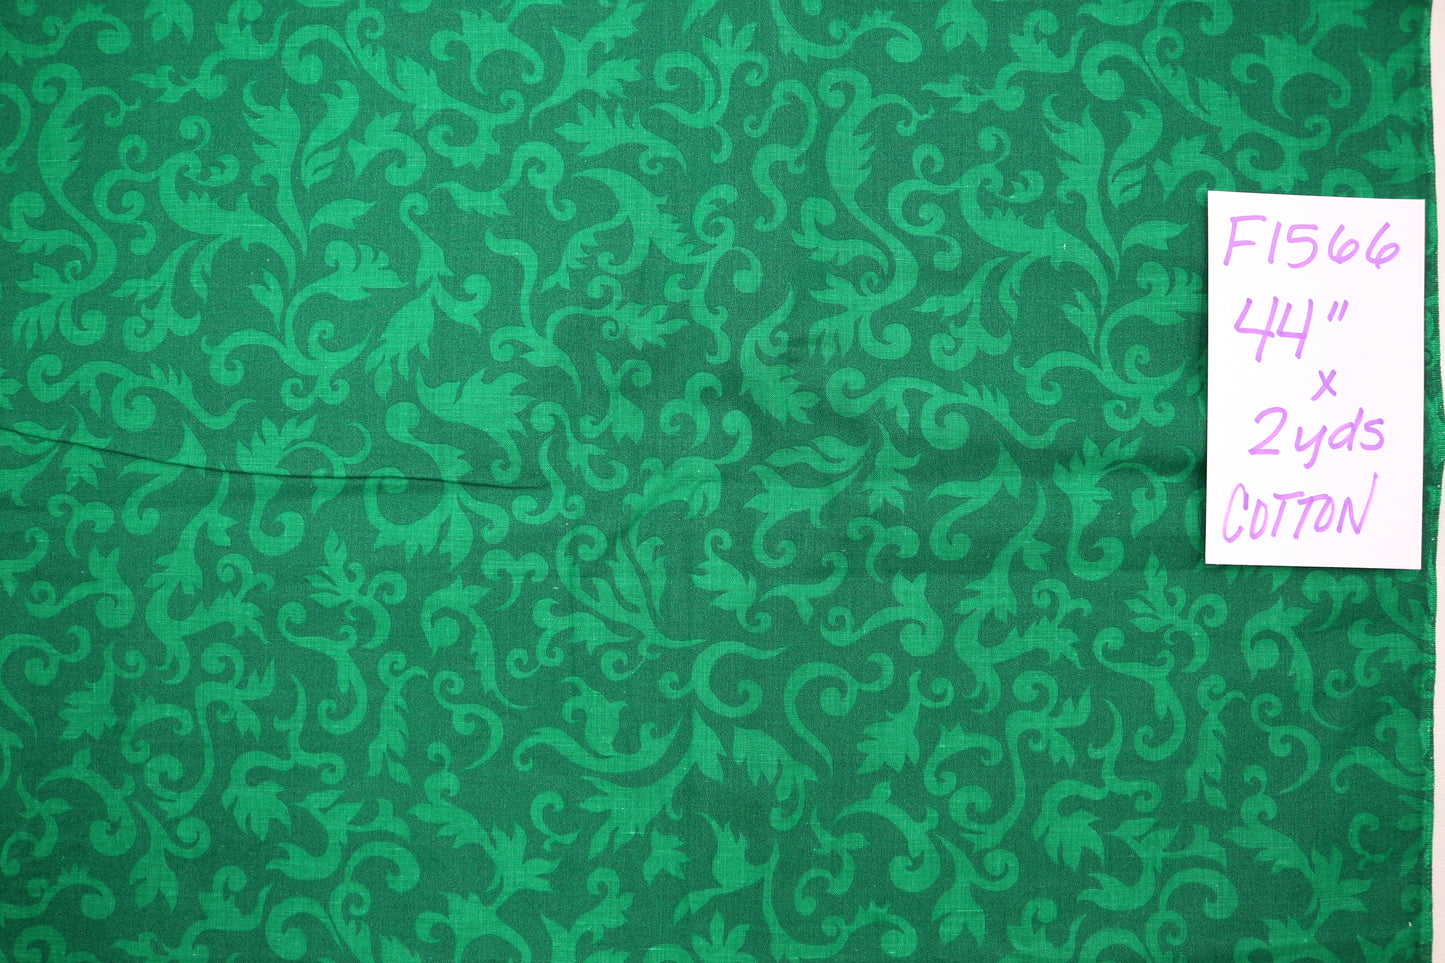 Green Holly Cotton Fabric 44" x 2 yds